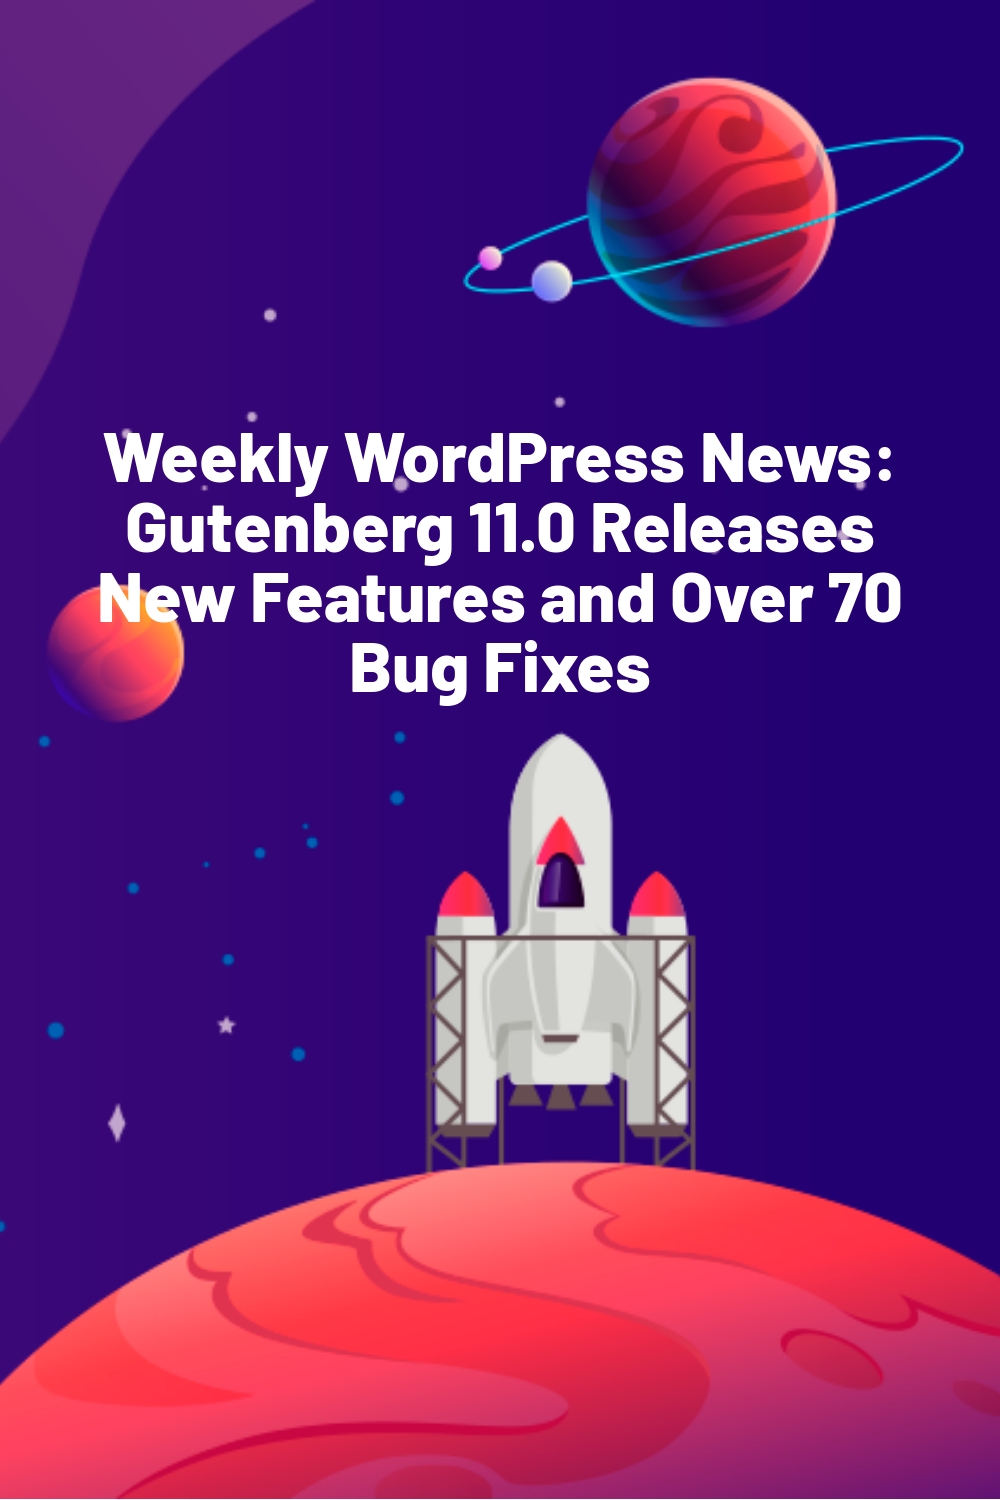 Weekly WordPress News: Gutenberg 11.0 Releases New Features and Over 70 Bug Fixes